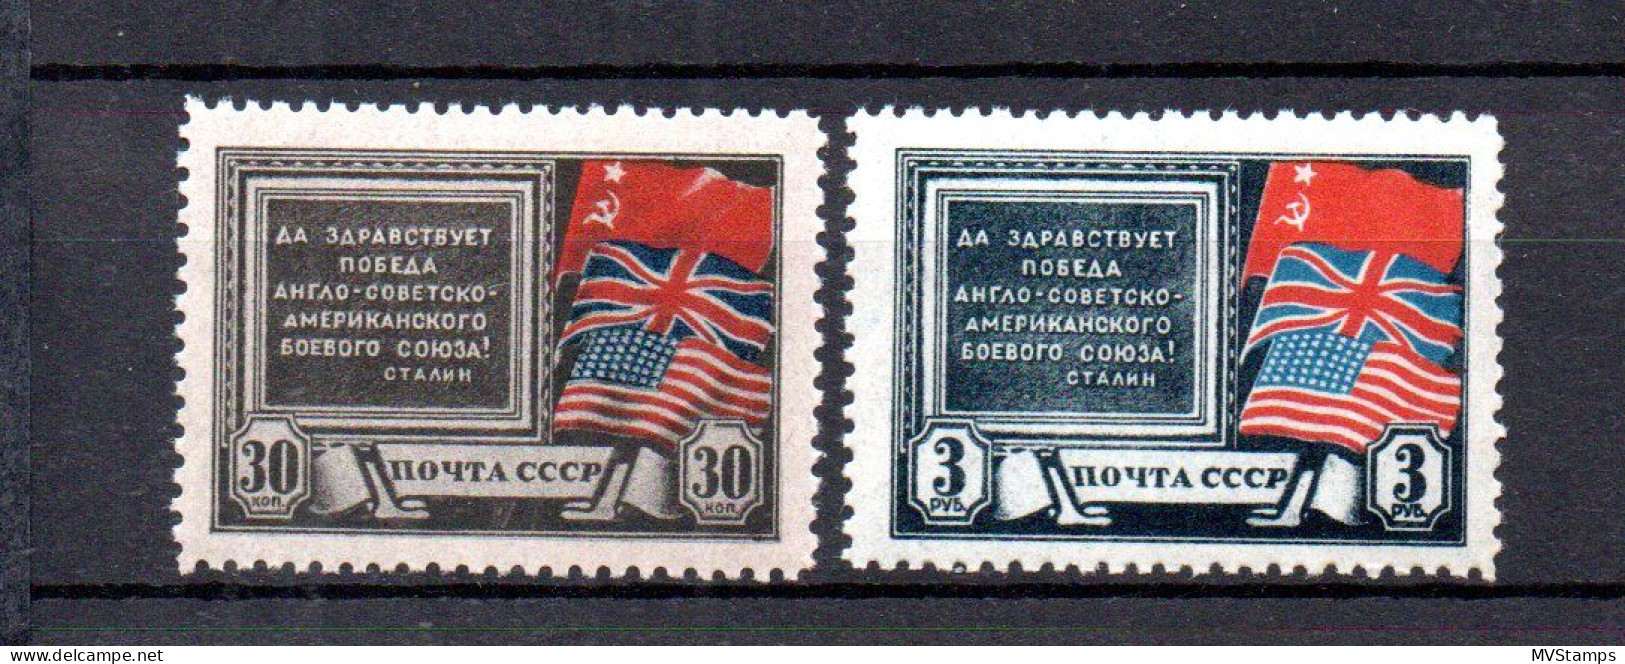 Russia 1943 Old Set Flags/Teheran Conference Stamps (Michel 890/91) MNH - Nuevos